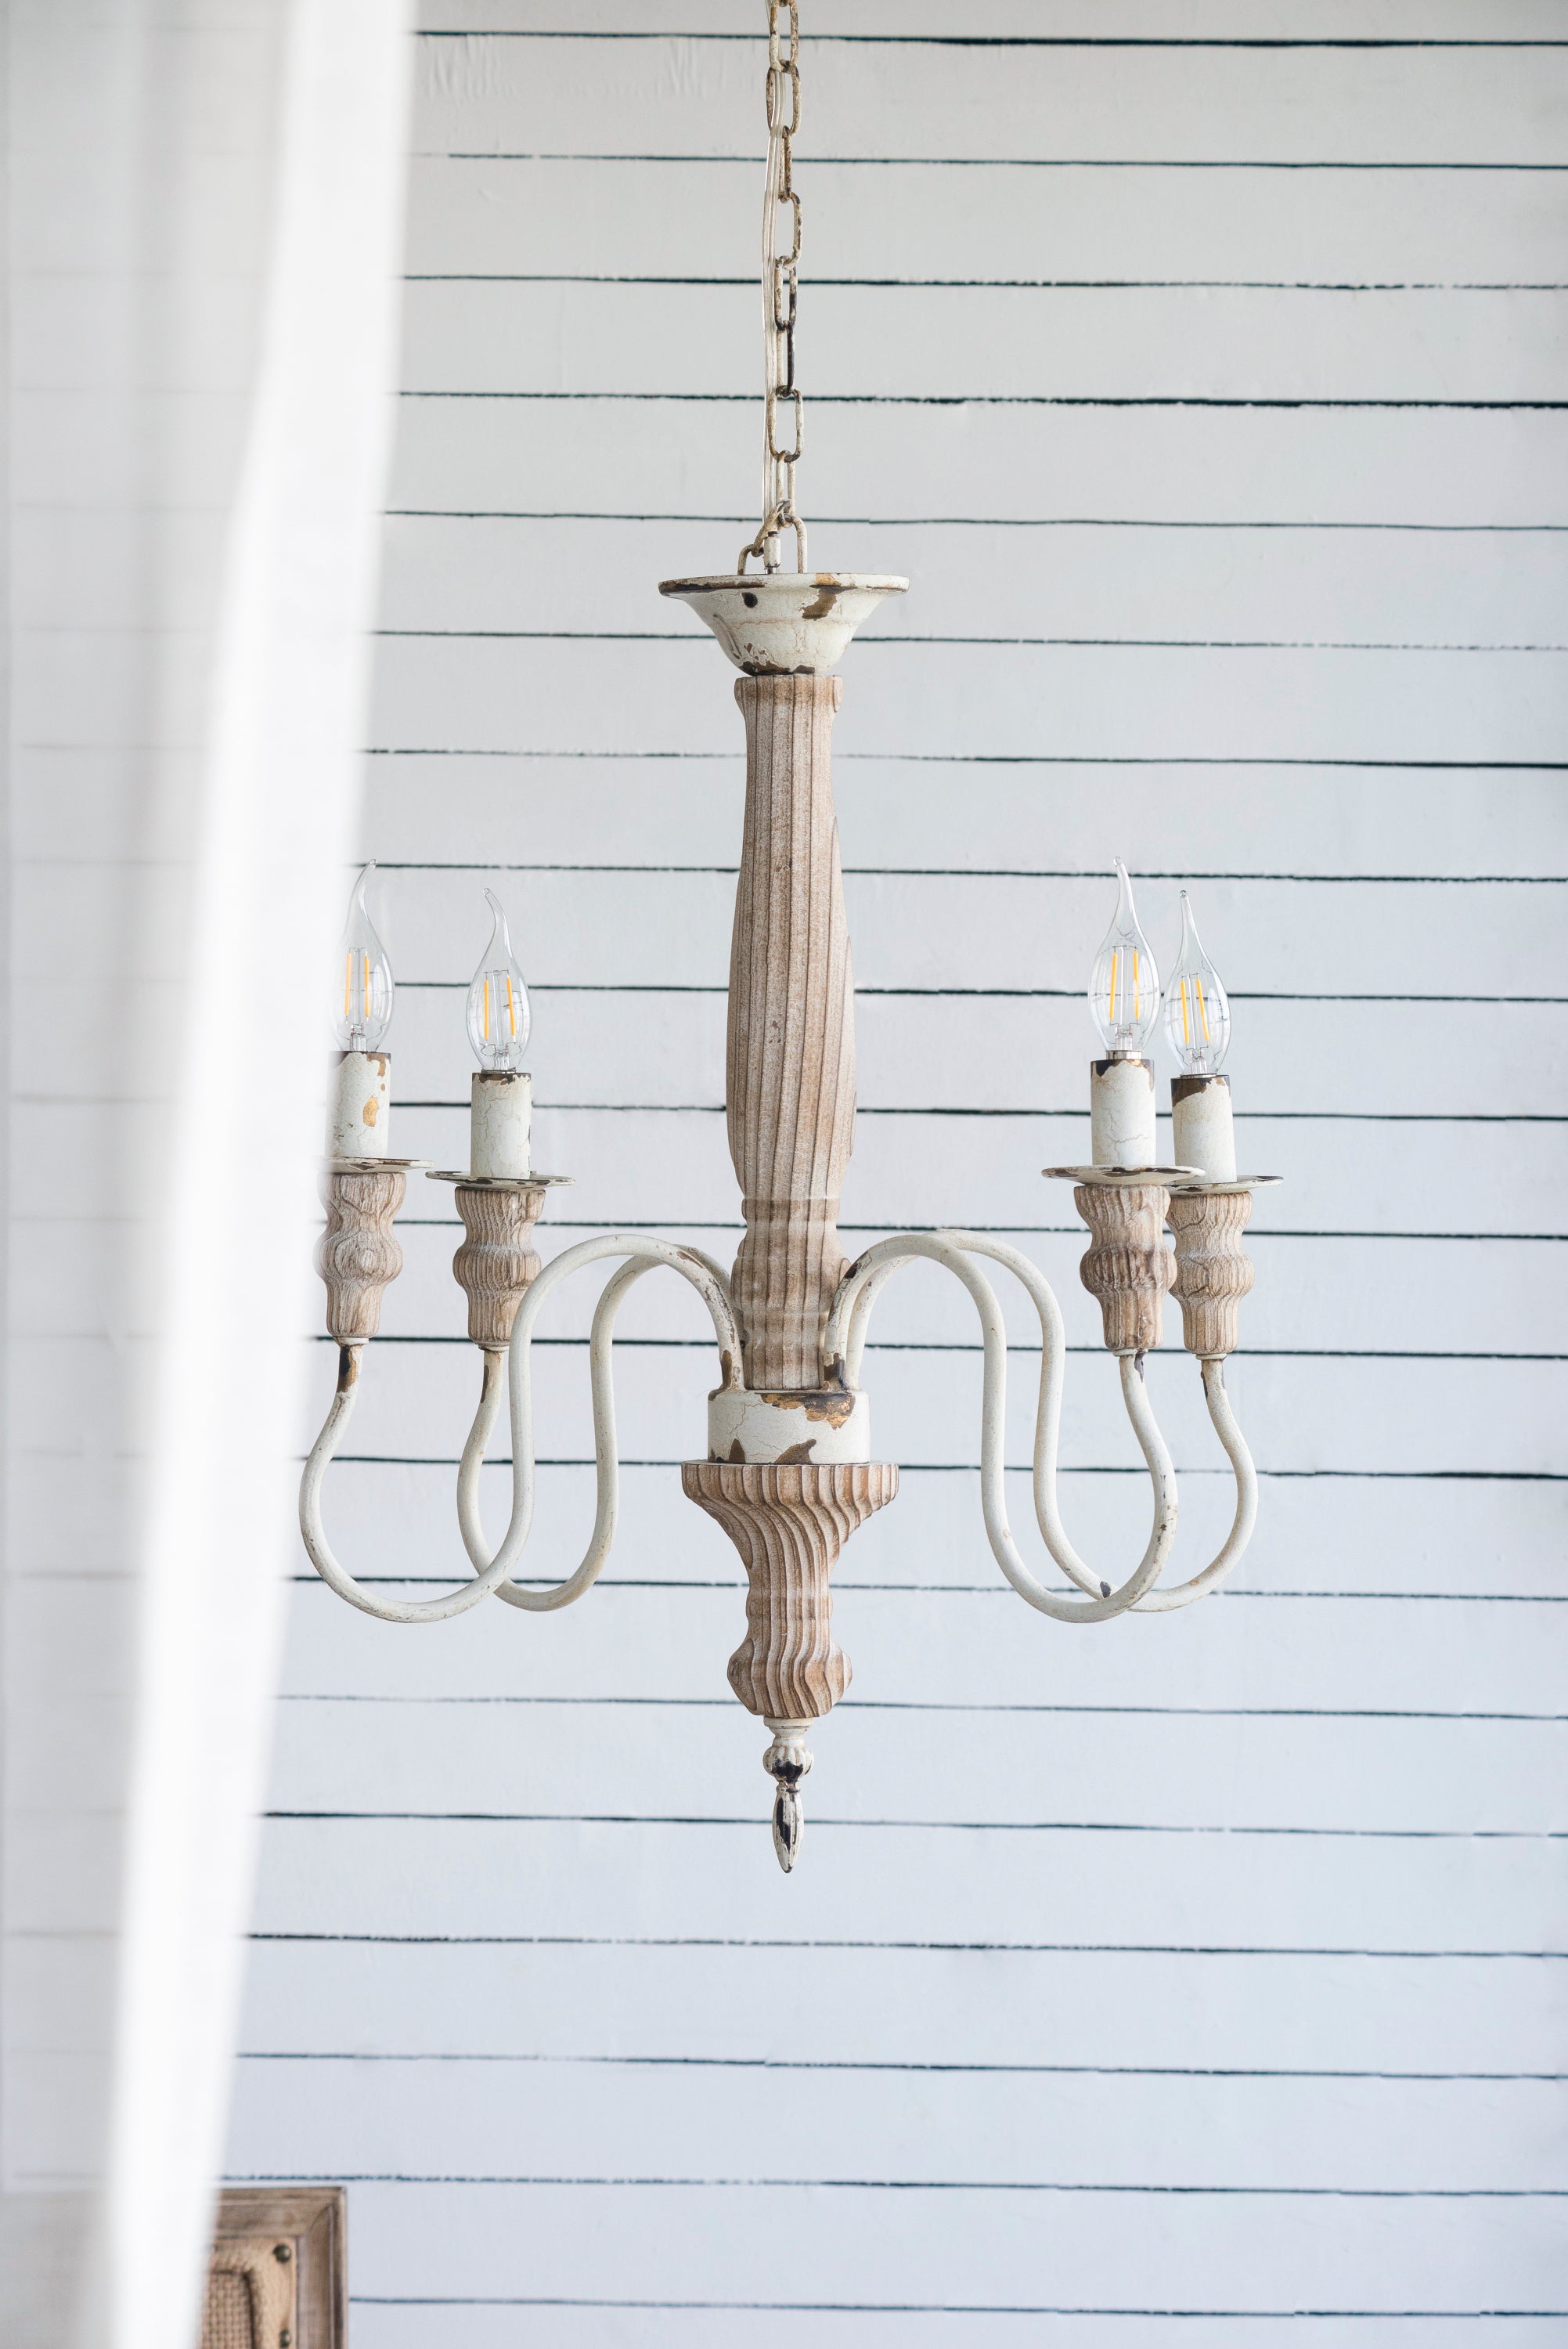 4-Light Rustic Style Chandelier, Hanging Light Fixture with Adjustable Chain - Cream White